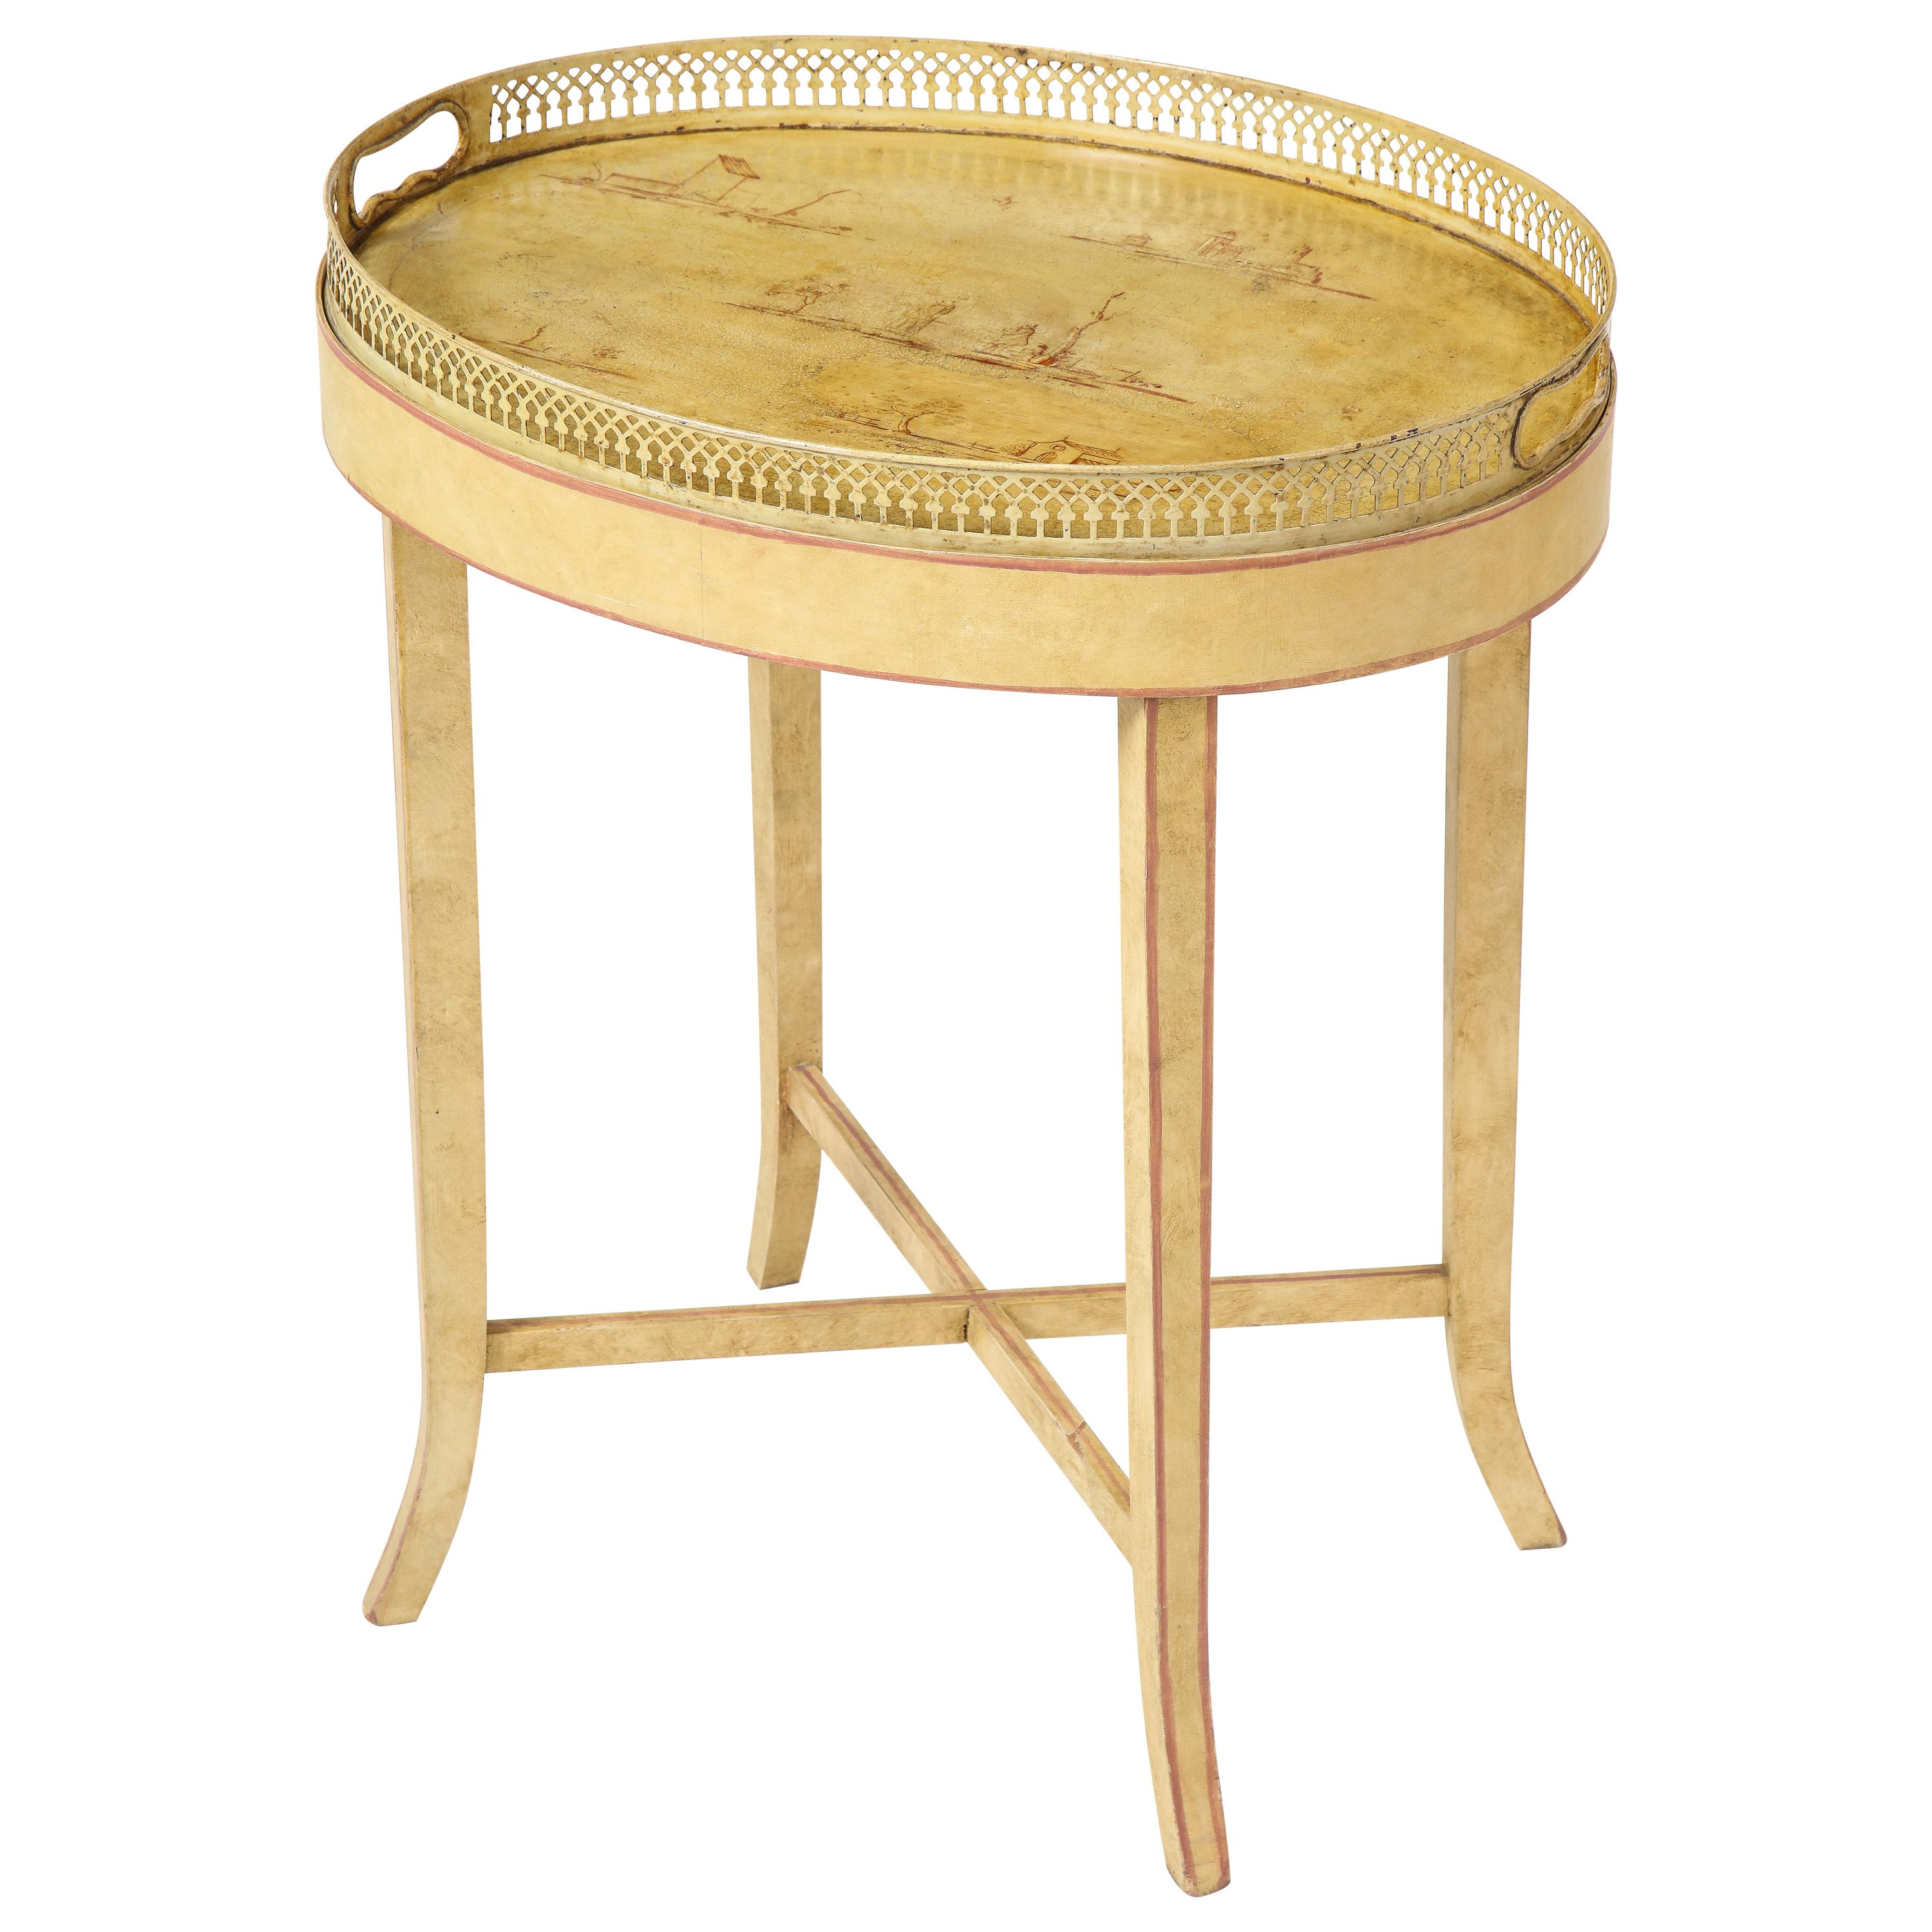 Cream-Painted Oval Tray Table with Chinoiserie Decoration